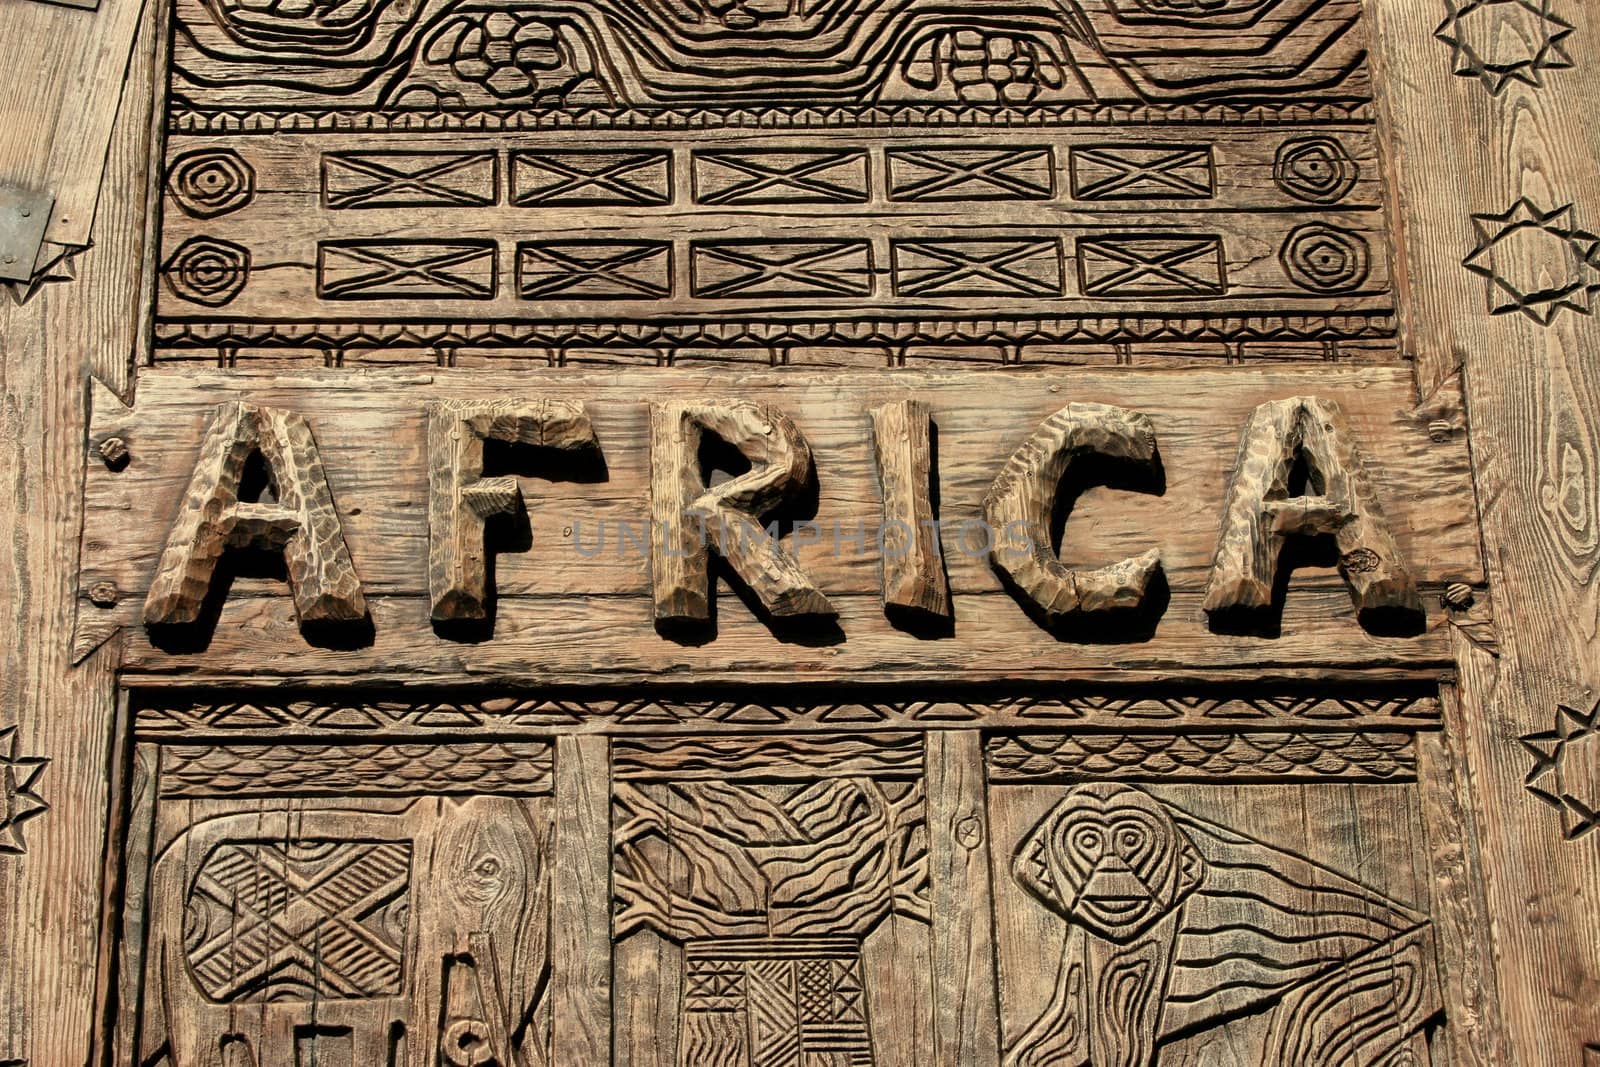 An africa sign on wood with carvings.